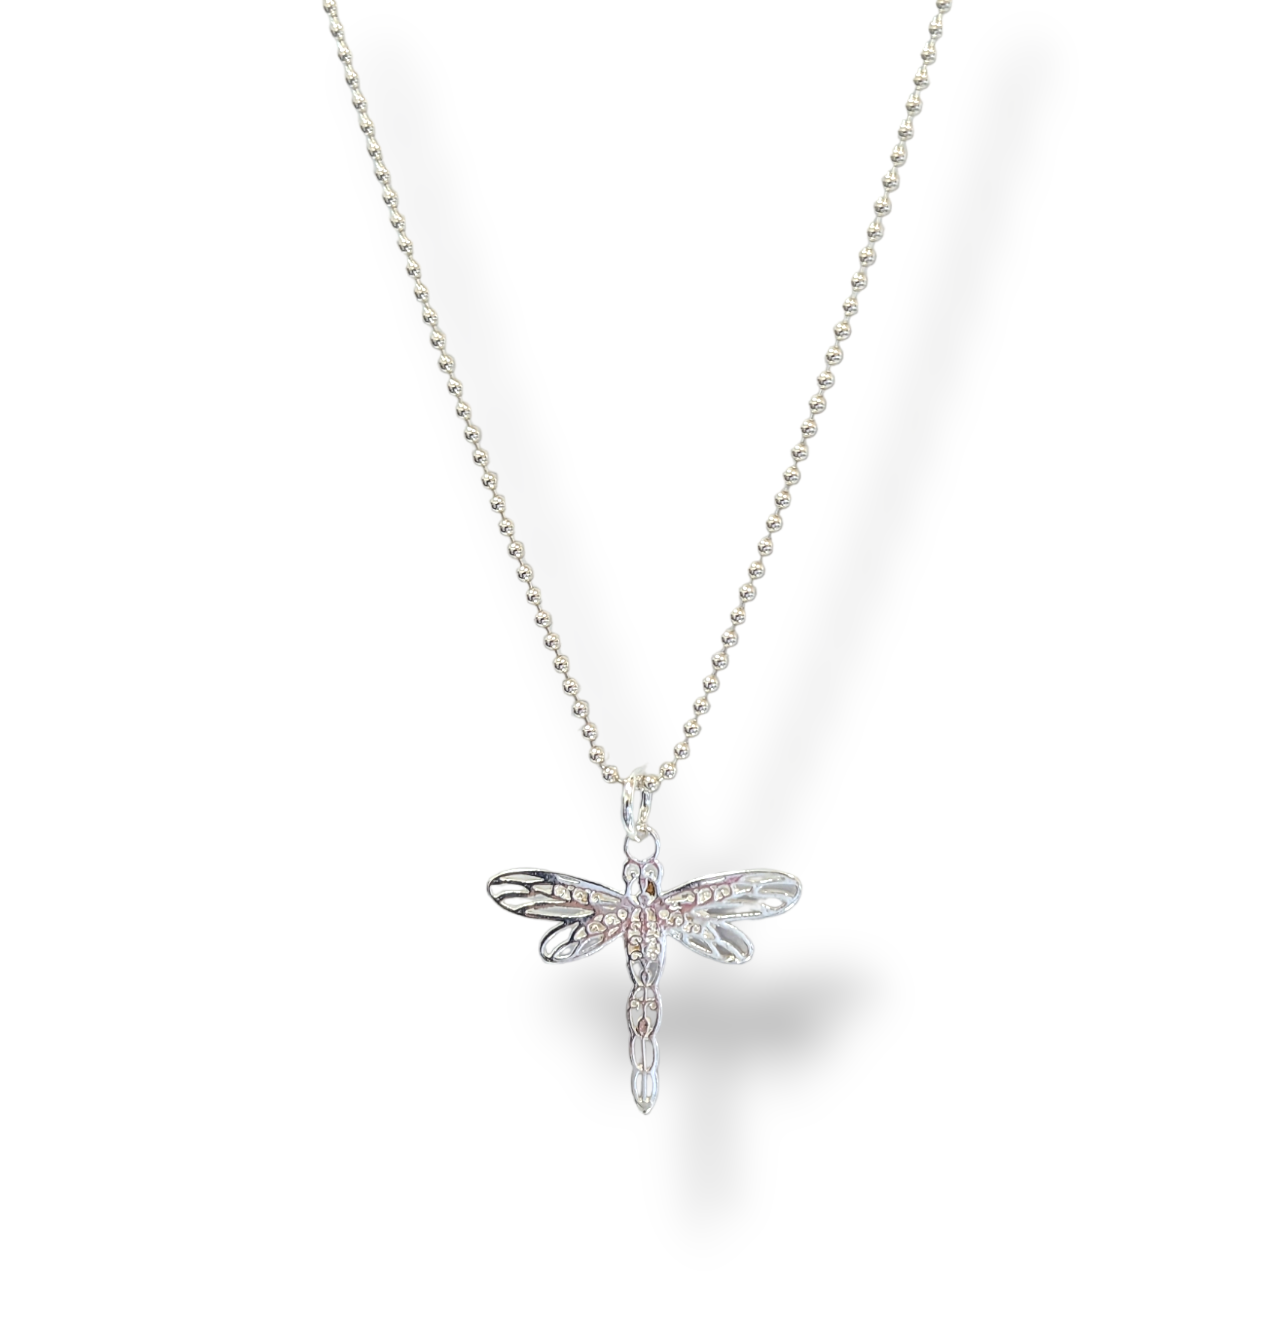 Maxi Dragonfly Necklace